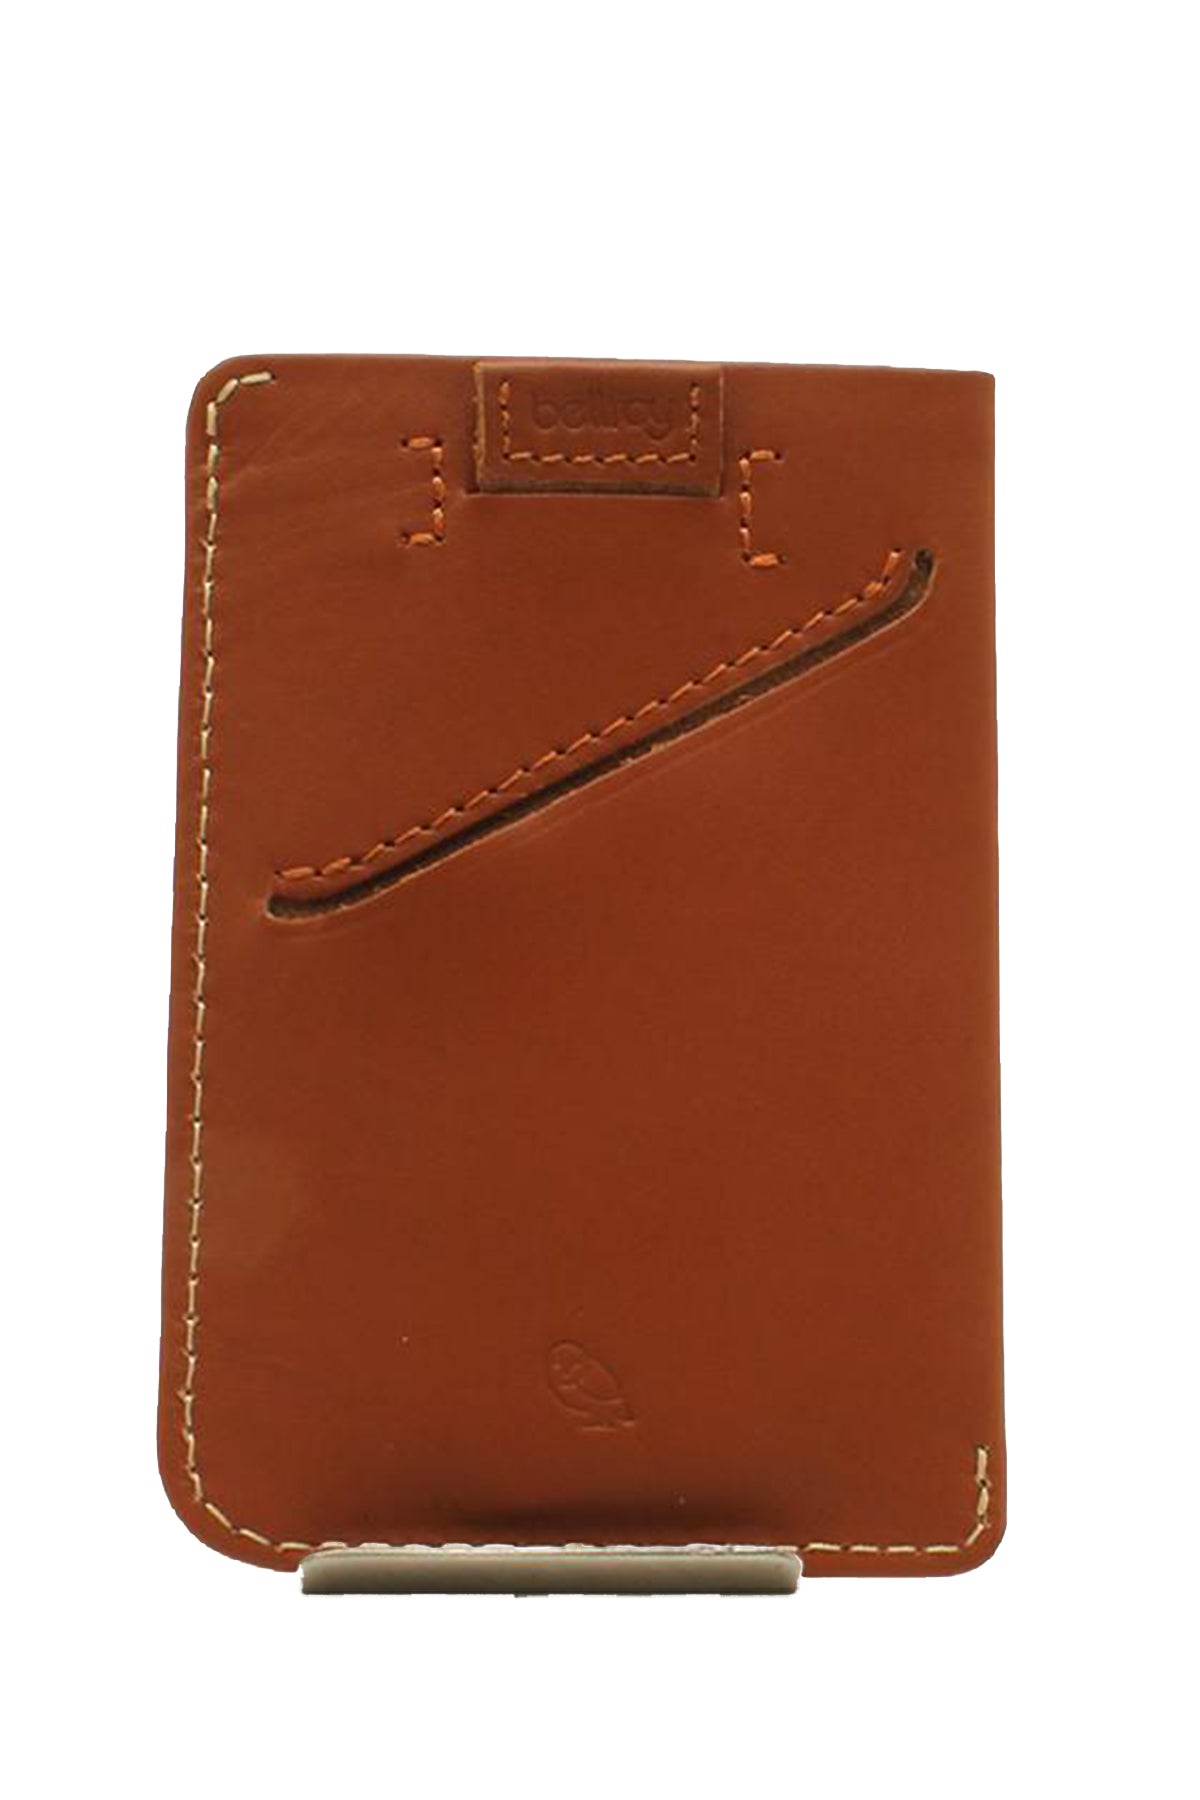 Bellroy Card Sleeve Veg Tanned Leather Wallet